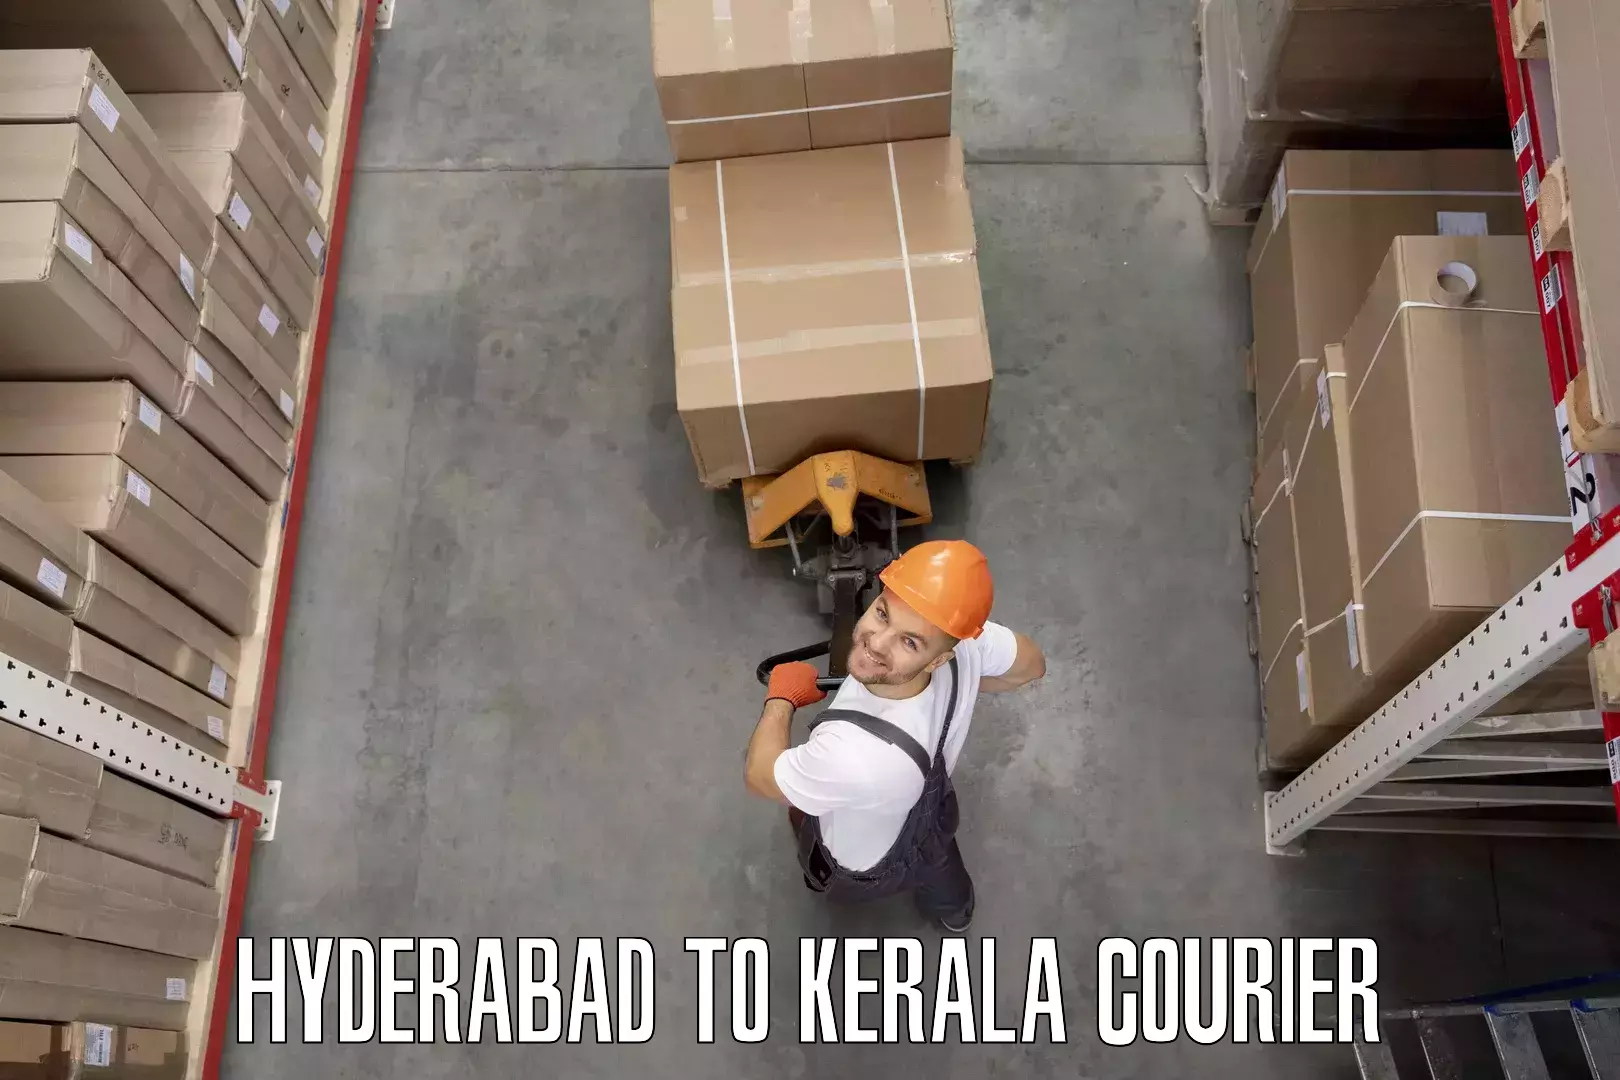 Furniture transport specialists Hyderabad to Cochin University of Science and Technology